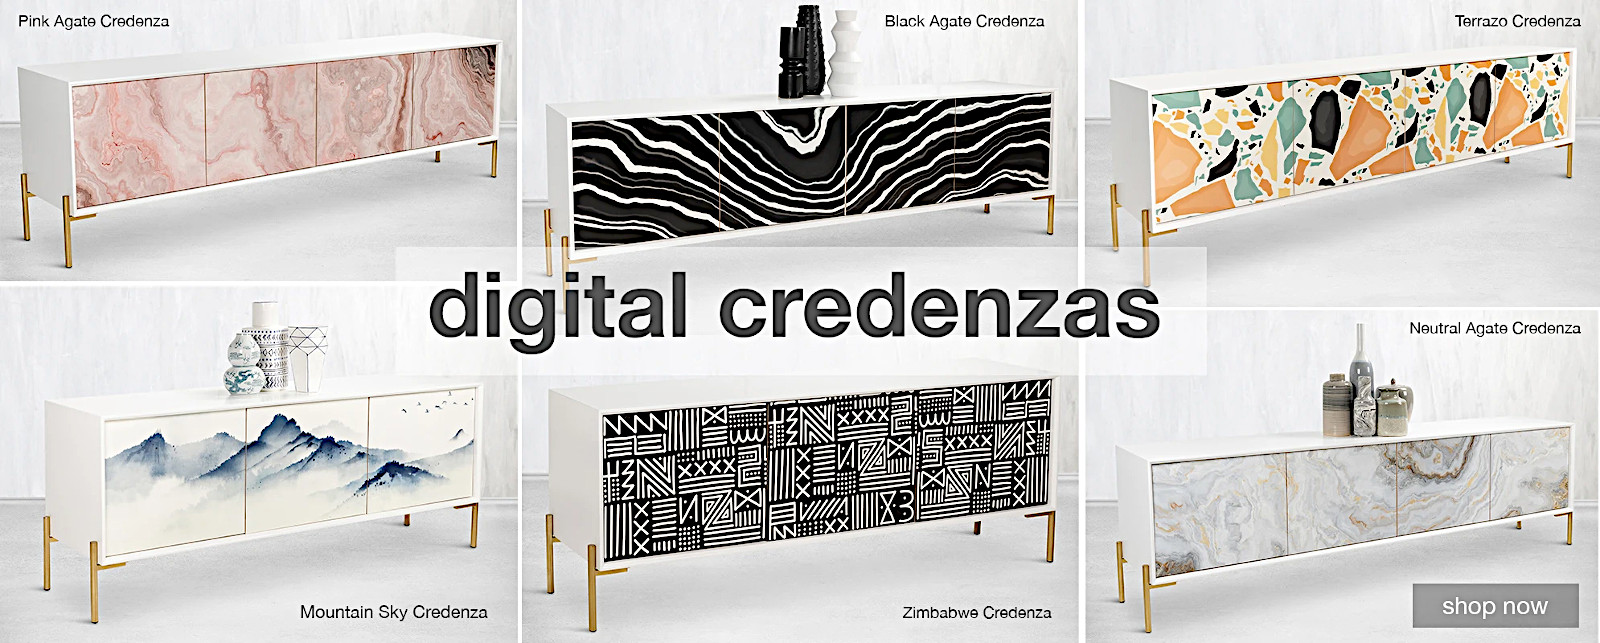 Discounted Price digitally printed credenzas